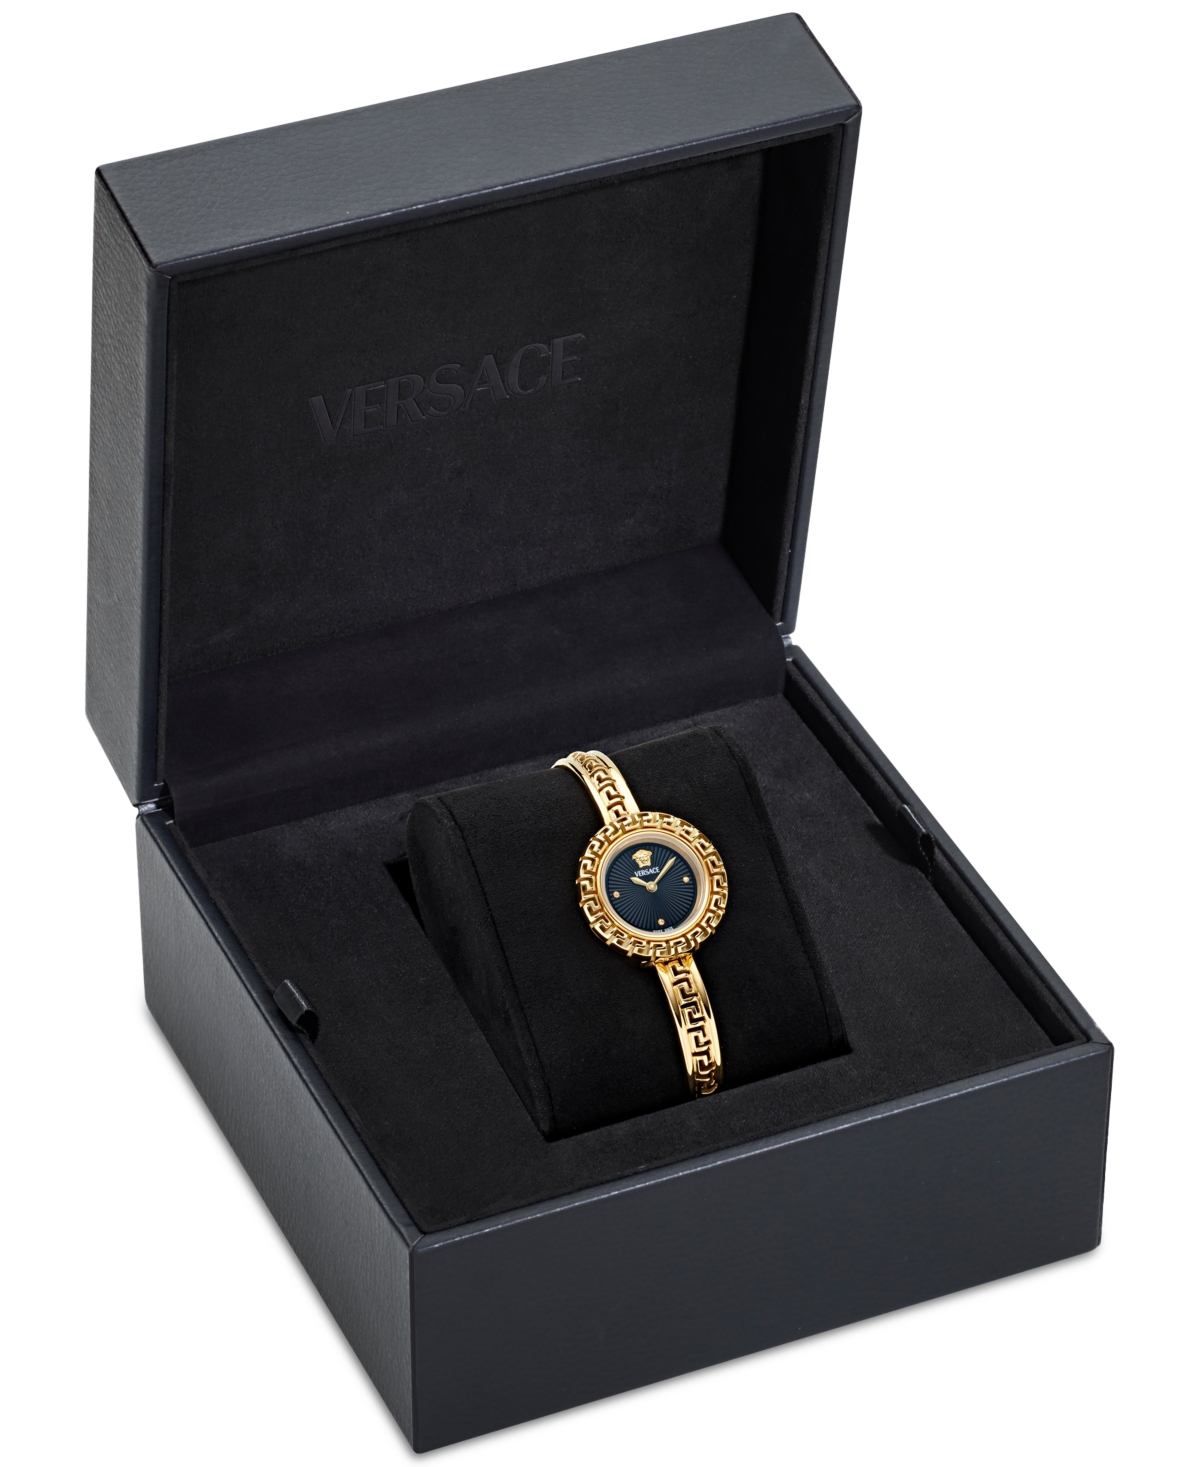 Shop Versace Women's Swiss Gold Ion Plated Stainless Steel Bangle Bracelet Watch 28mm